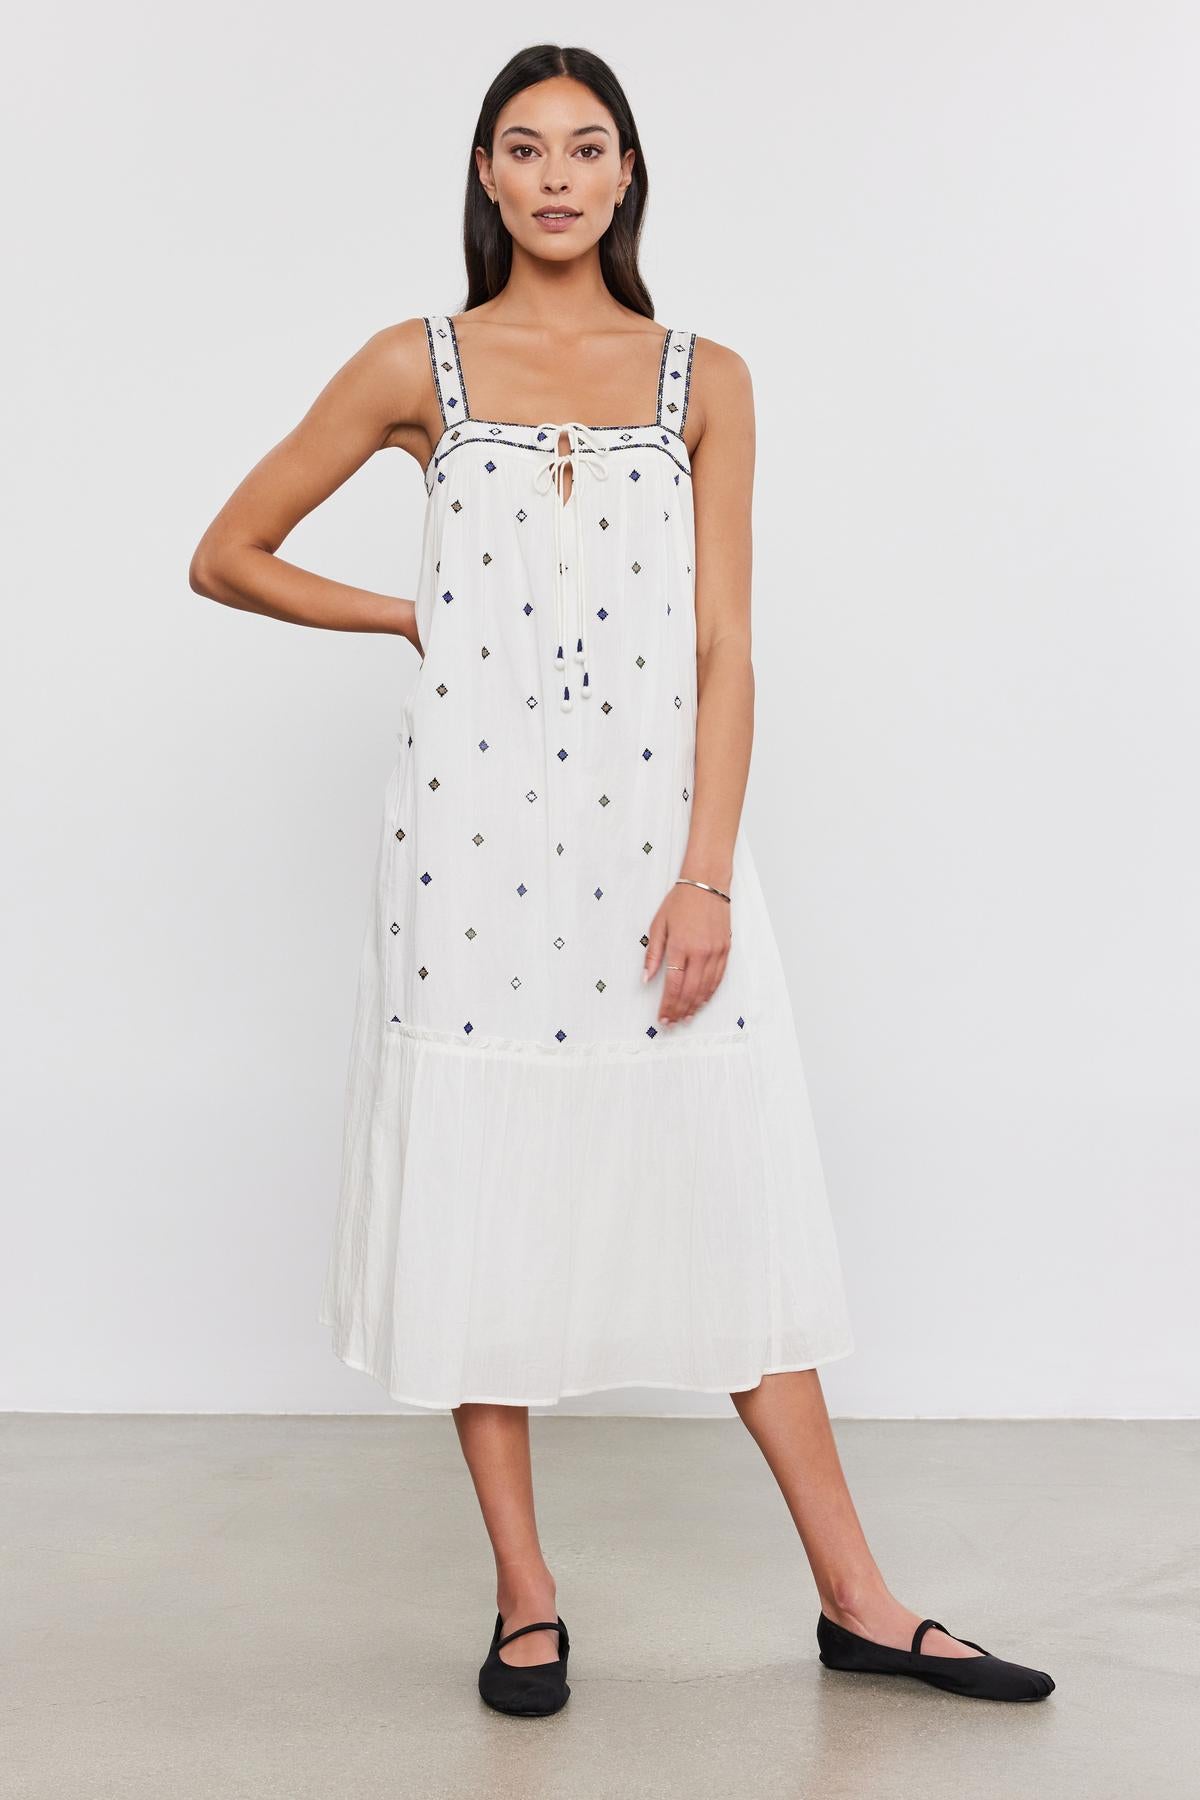   A woman in a white sleeveless Velvet by Graham & Spencer Riley dress with black polka dots and drawstring neckline, paired with black flat shoes, standing against a plain background. 